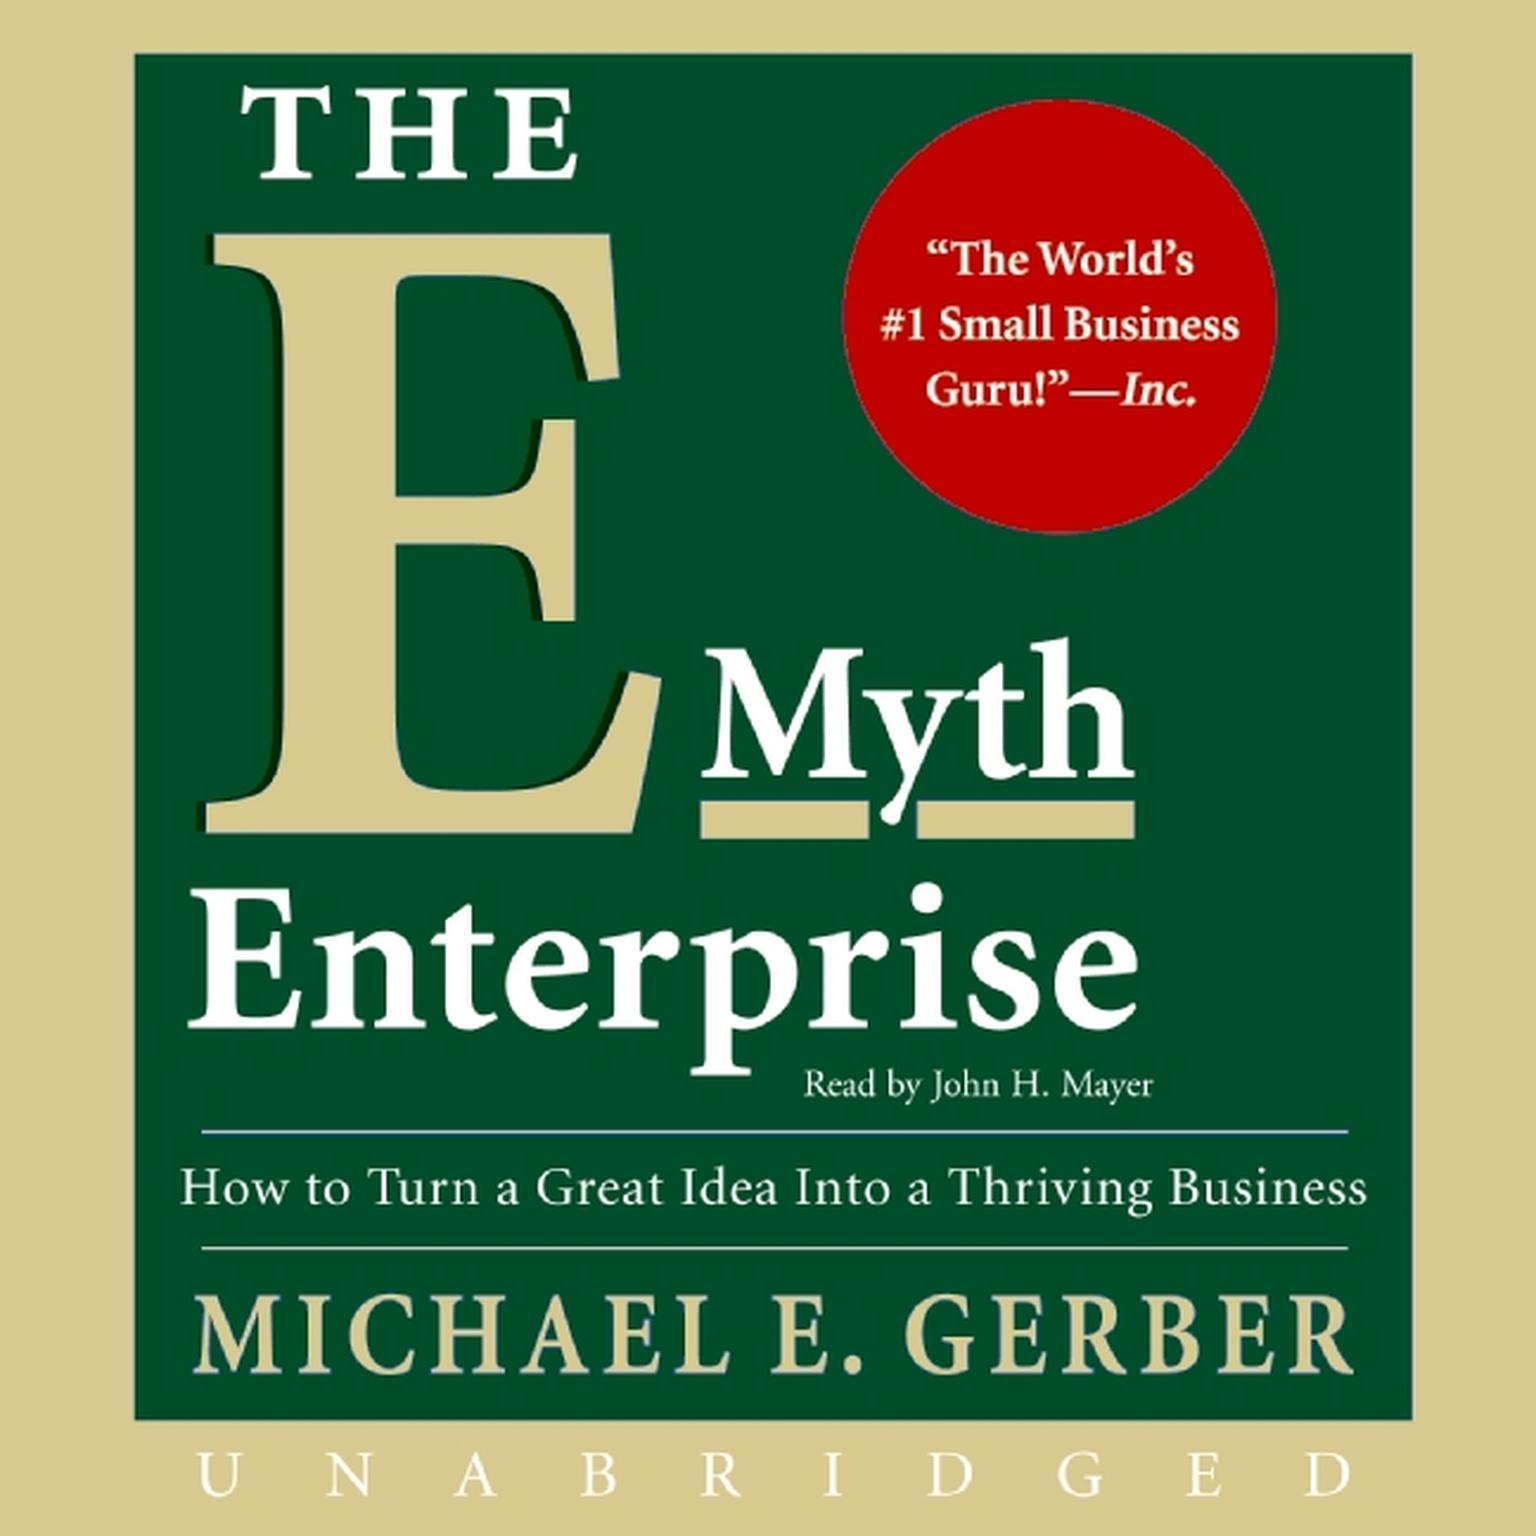 The E-Myth Enterprise: How to Turn A Great Idea Into a Thriving Business Audiobook, by Michael E. Gerber